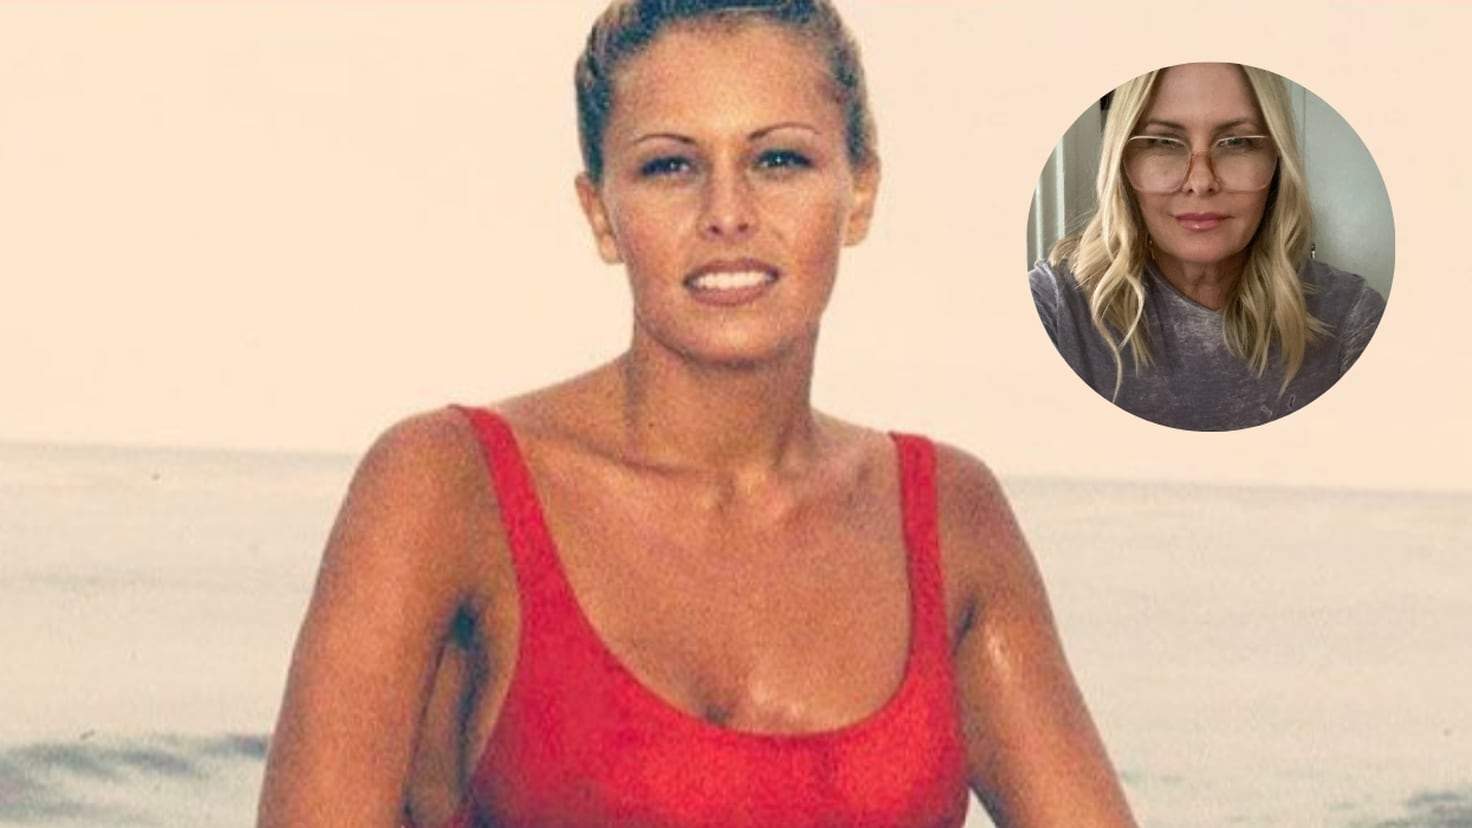 Nicole Eggert, from Baywatch, announces that she has breast cancer
